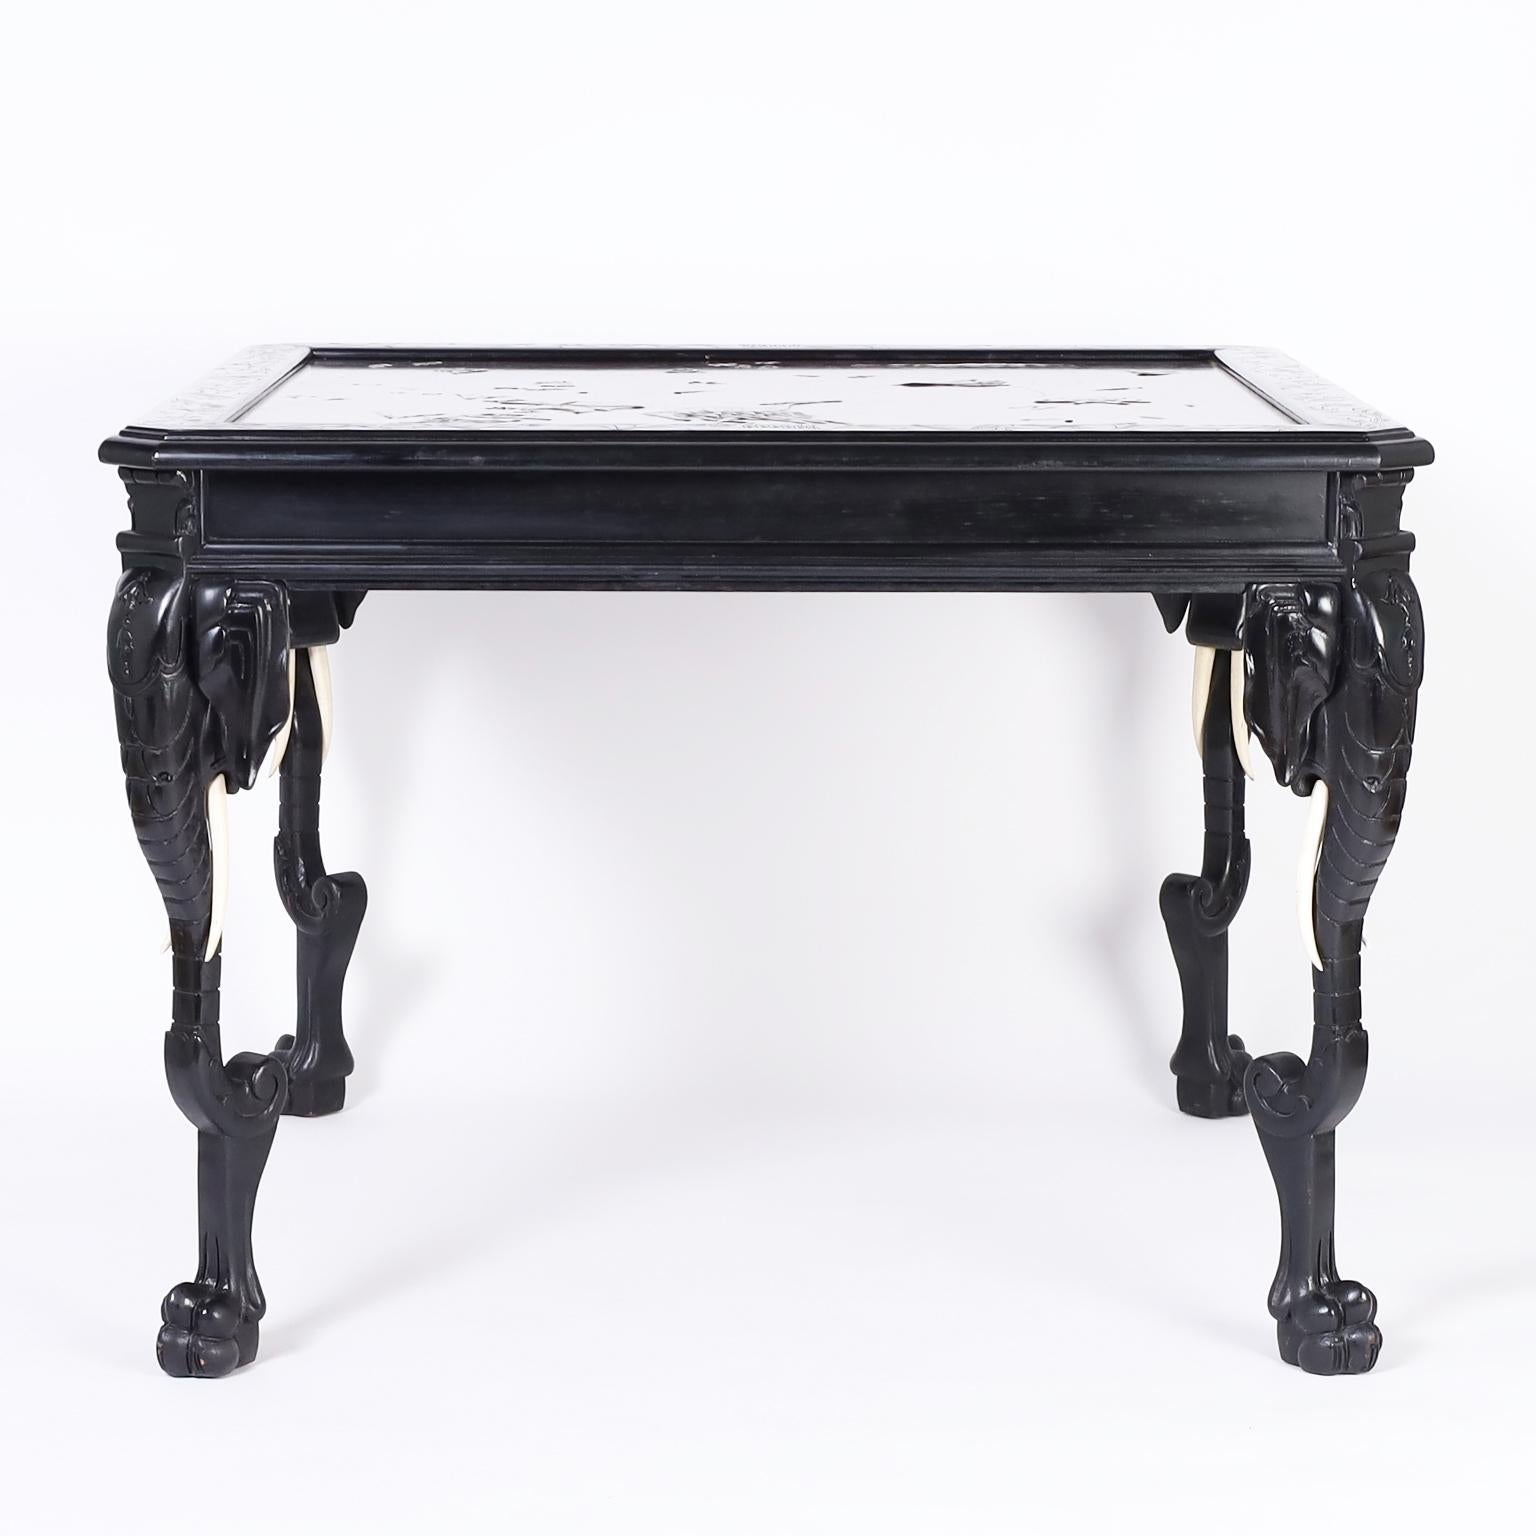 Square center table with a japanned or ebonized finish featuring a lacquered panel on top with an embossed stylized landscape. The legs have carved elephant heads with bone tusks and paw feet.